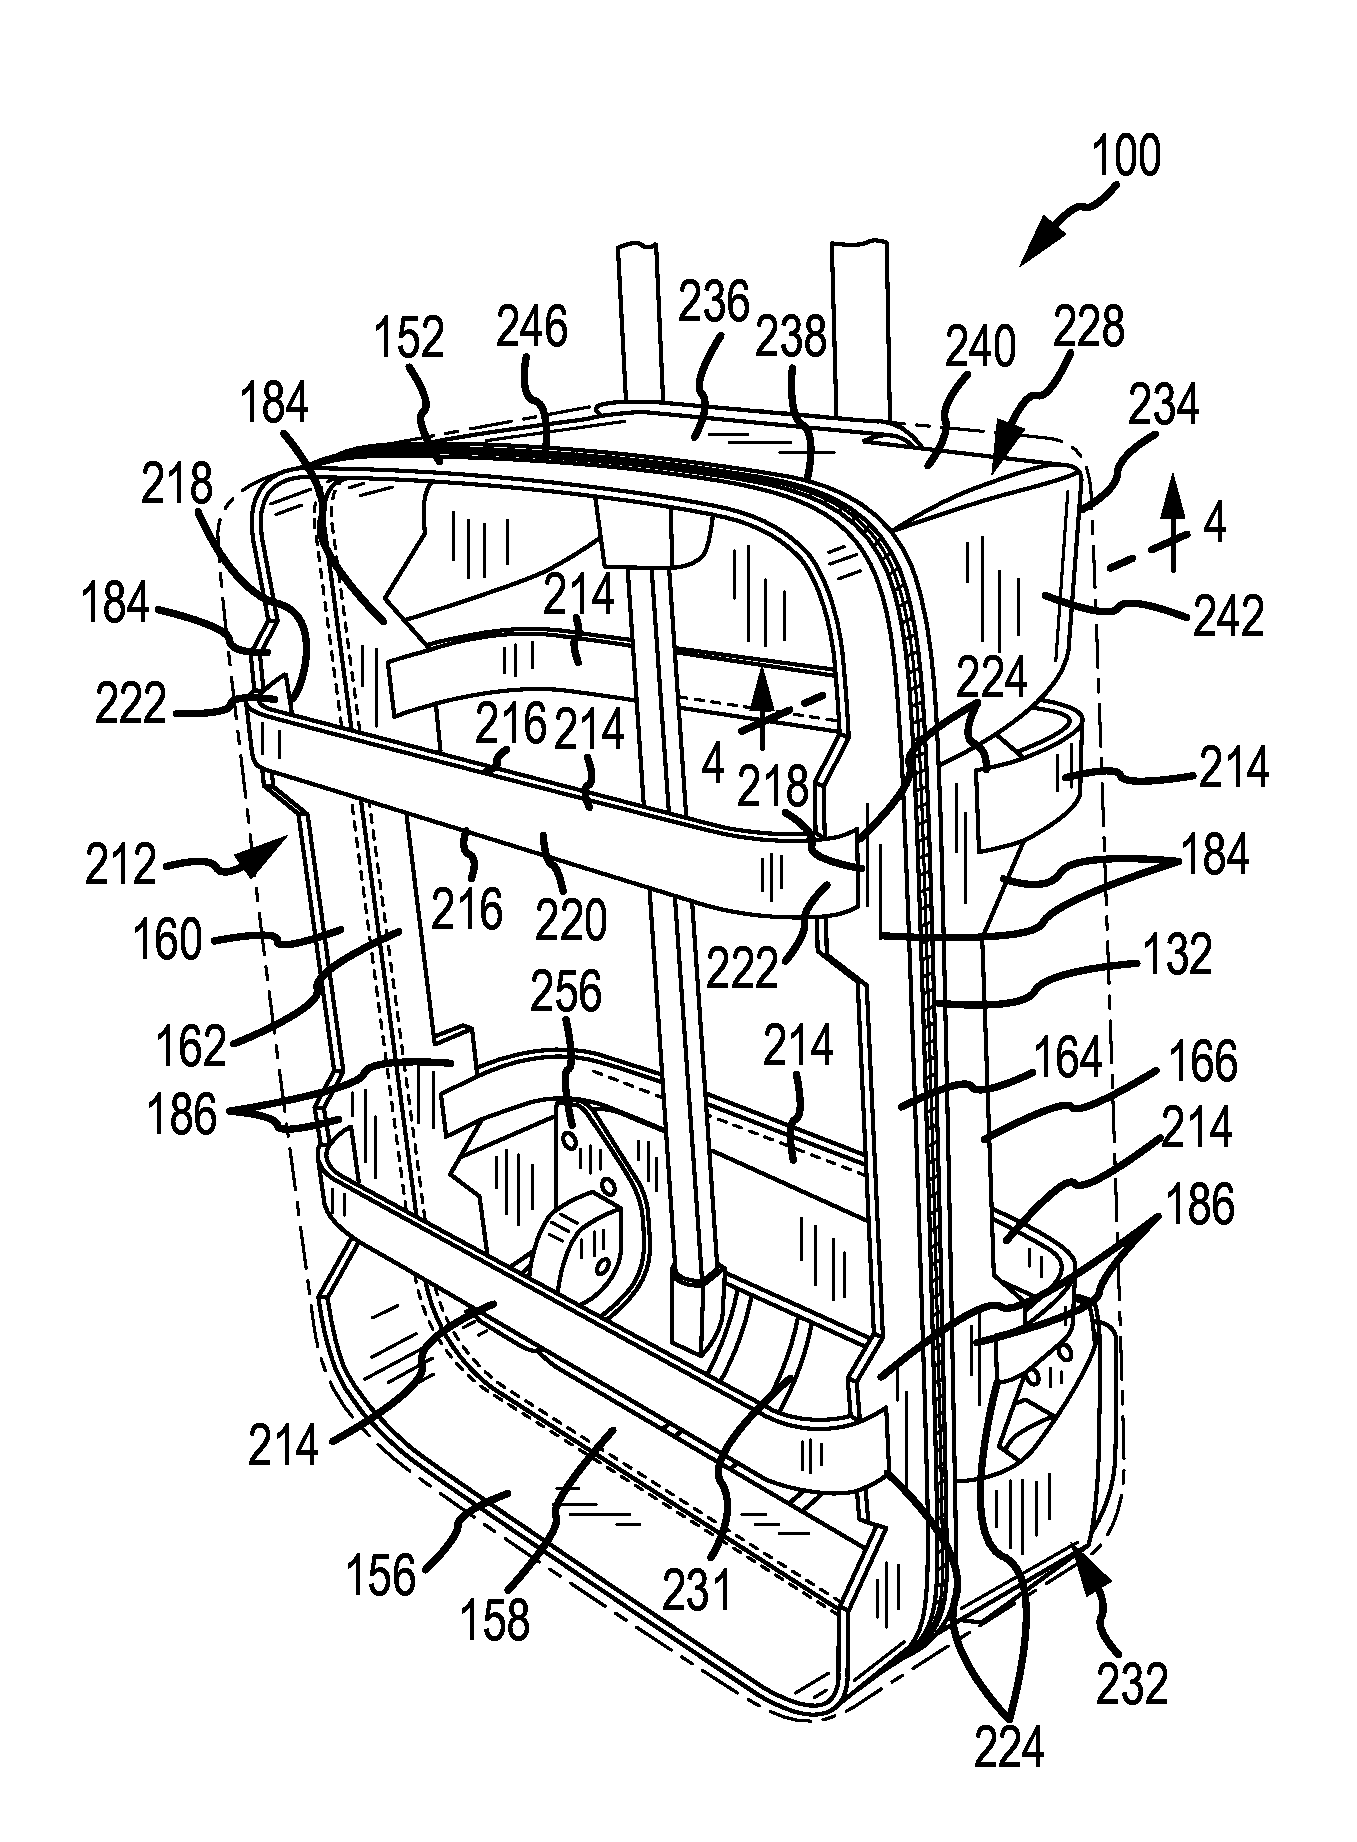 Frame structure for a luggage item